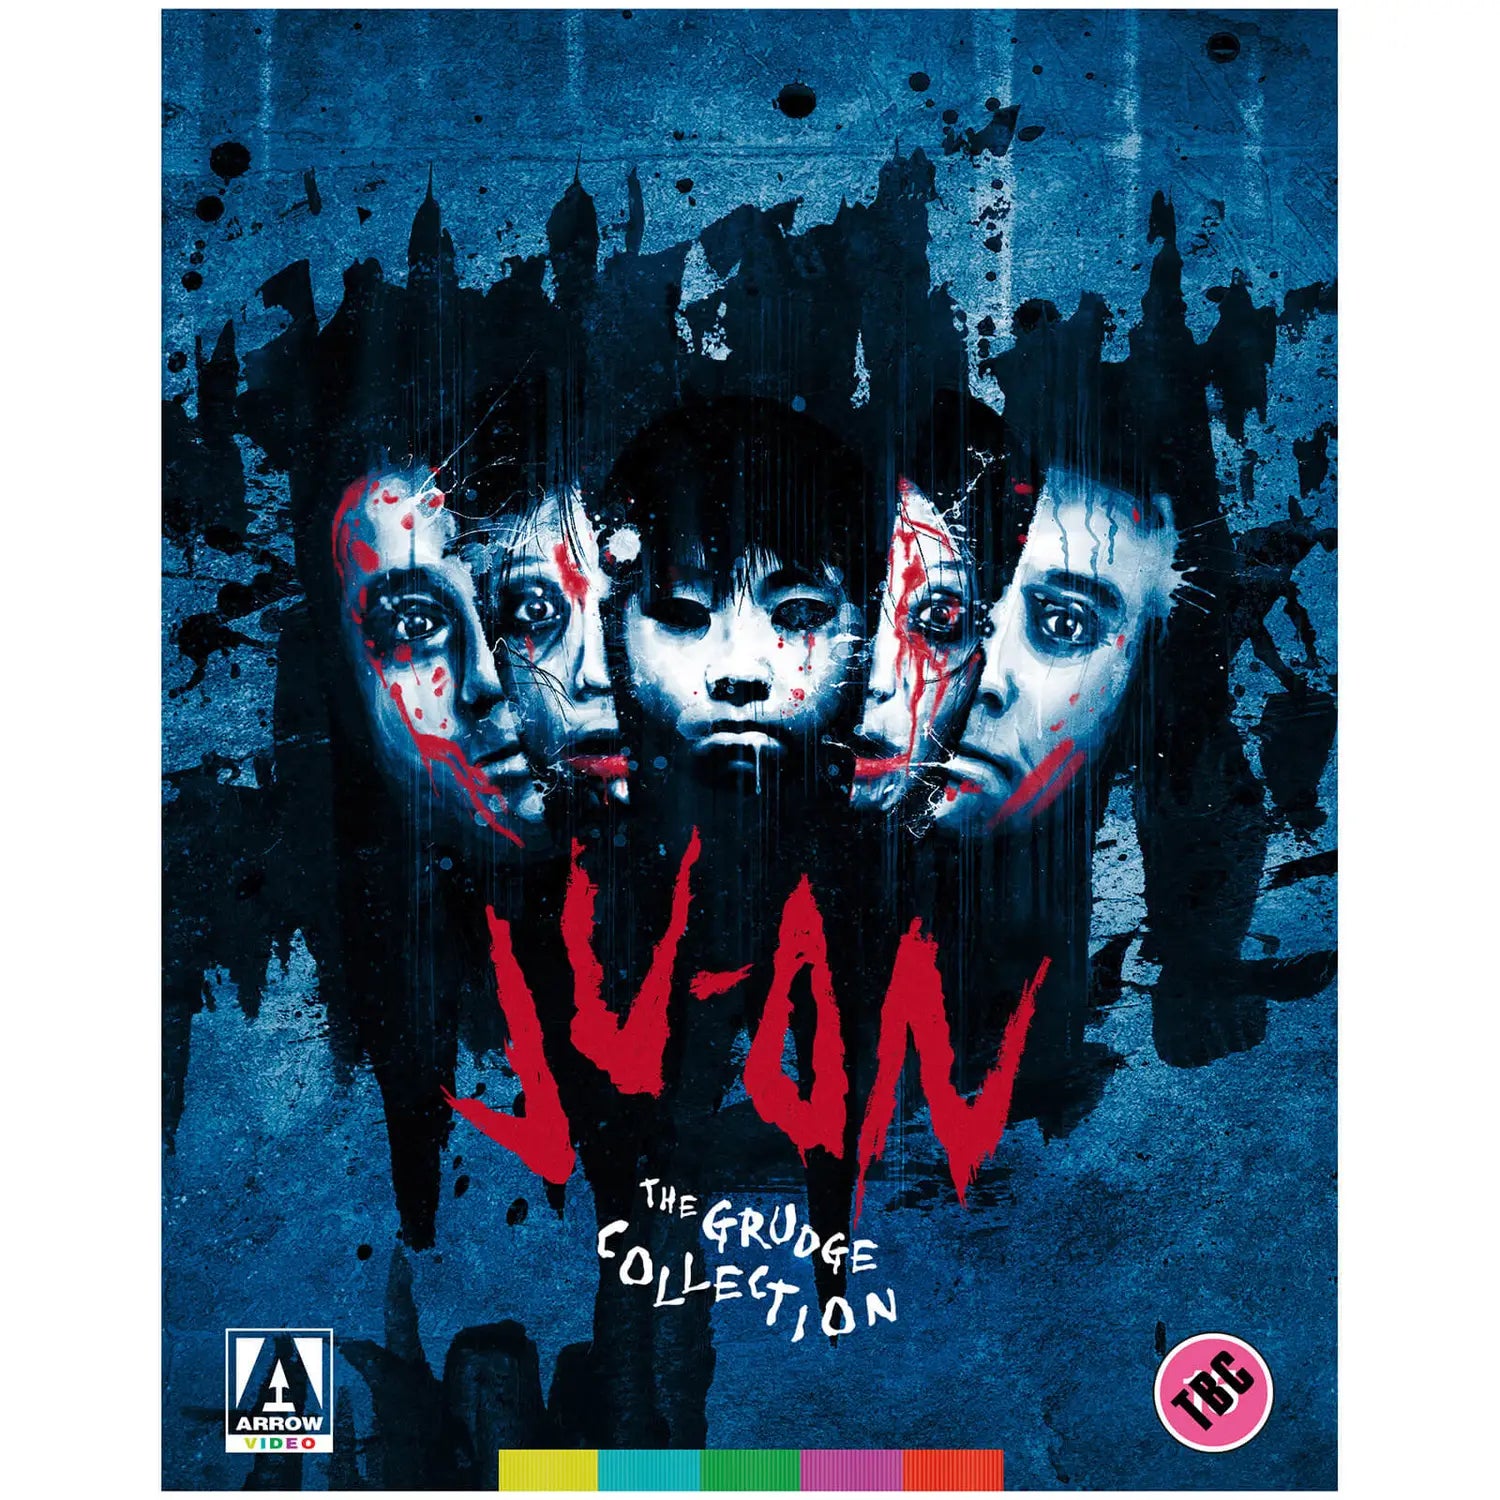 JU-ON: THE GRUDGE COLLECTION (REGION FREE/B IMPORT - LIMITED EDITION) 4K UHD/BLU-RAY [SCRATCH AND DENT]